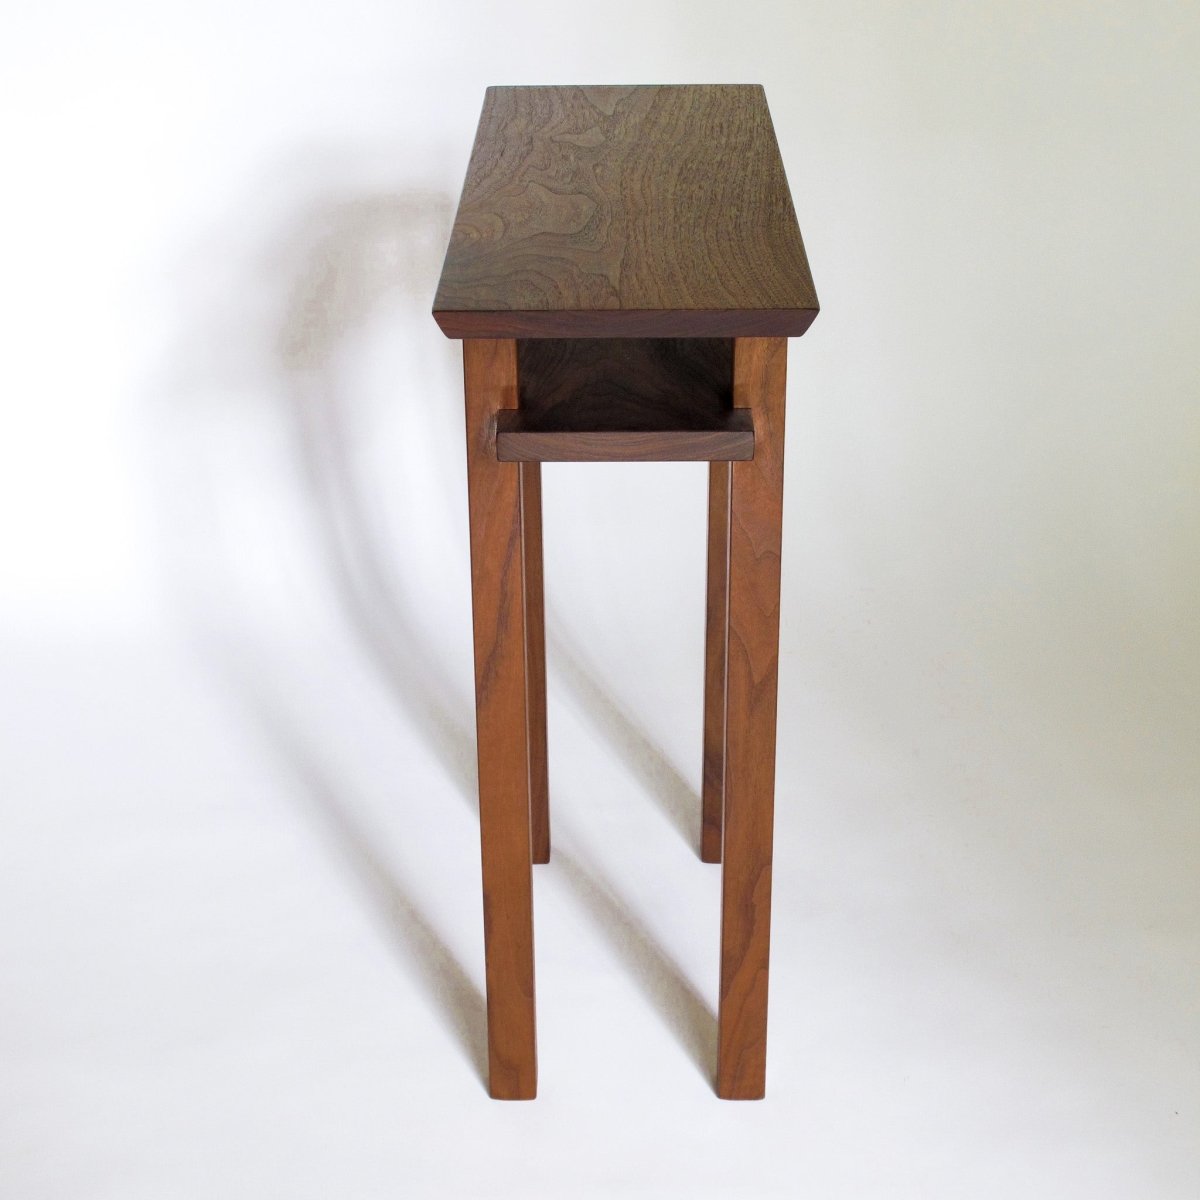 A skinny end table in solid walnut, hand-crafted by furniture artists at Mokuzai Furniture- modern wood furniture designs for small spaces